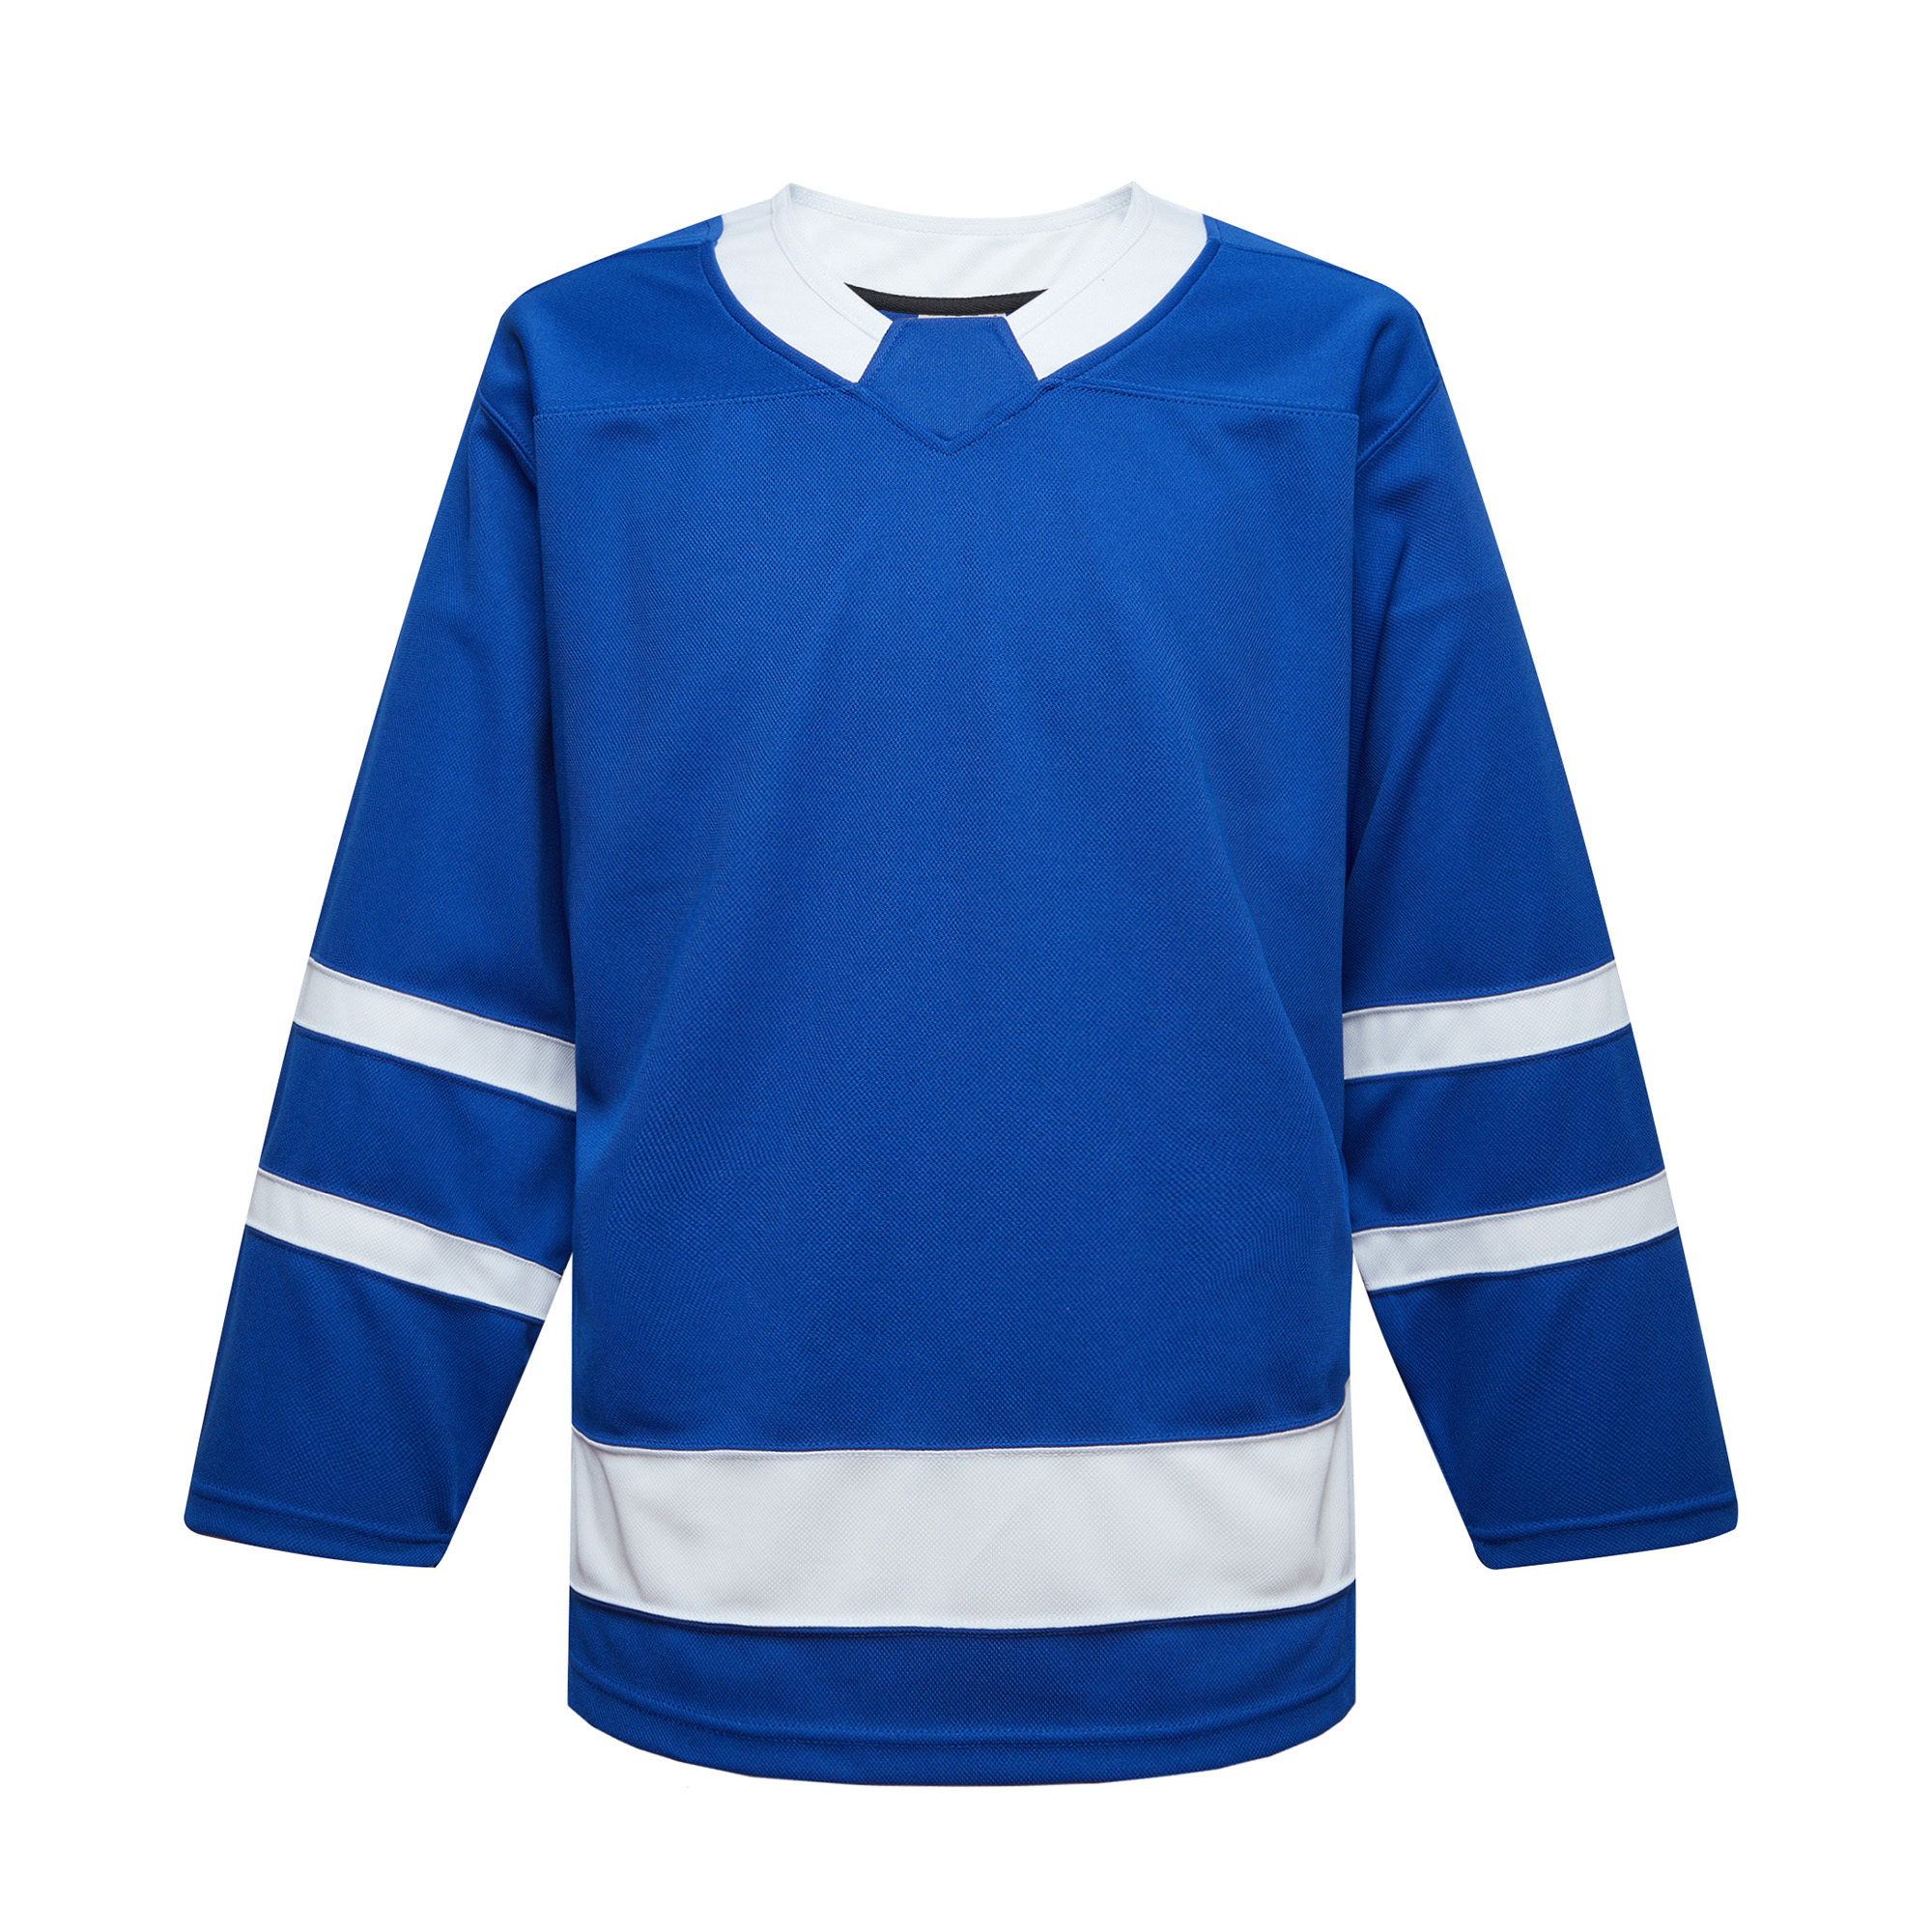 EALER H900-CA Series Hockey Team Blank Practice Jersey&Thick Breathable and Quick-Dry Fabric&Unisex Junior to Senior 